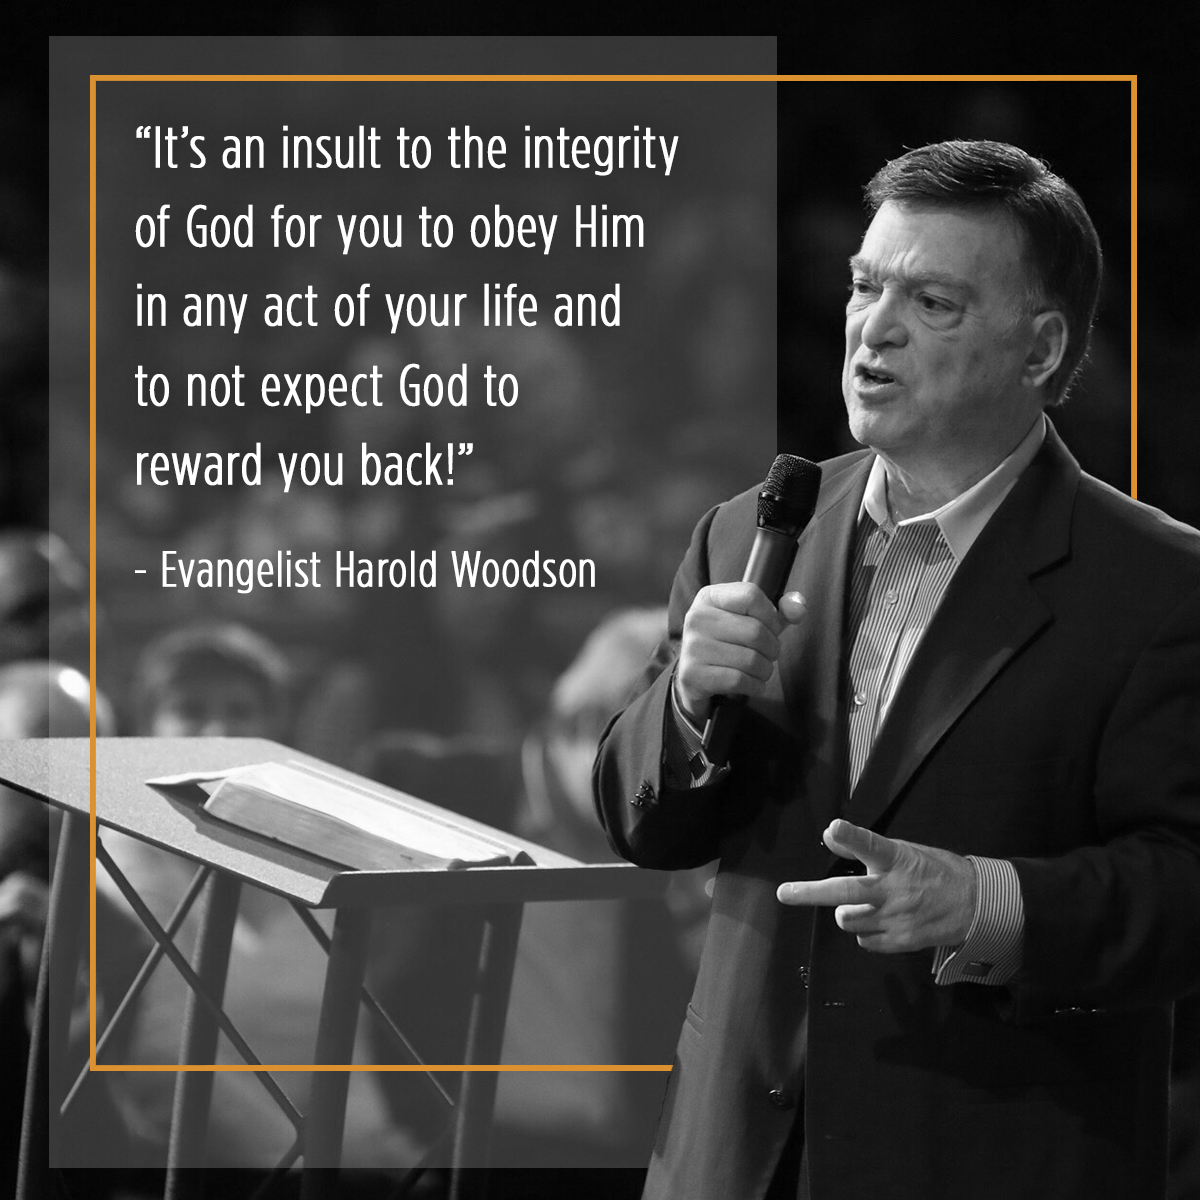 “It’s an insult to the integrity of God for you to obey Him in any act of your life and to not expect God to reward you back!” – Evangelist Harold Woodson